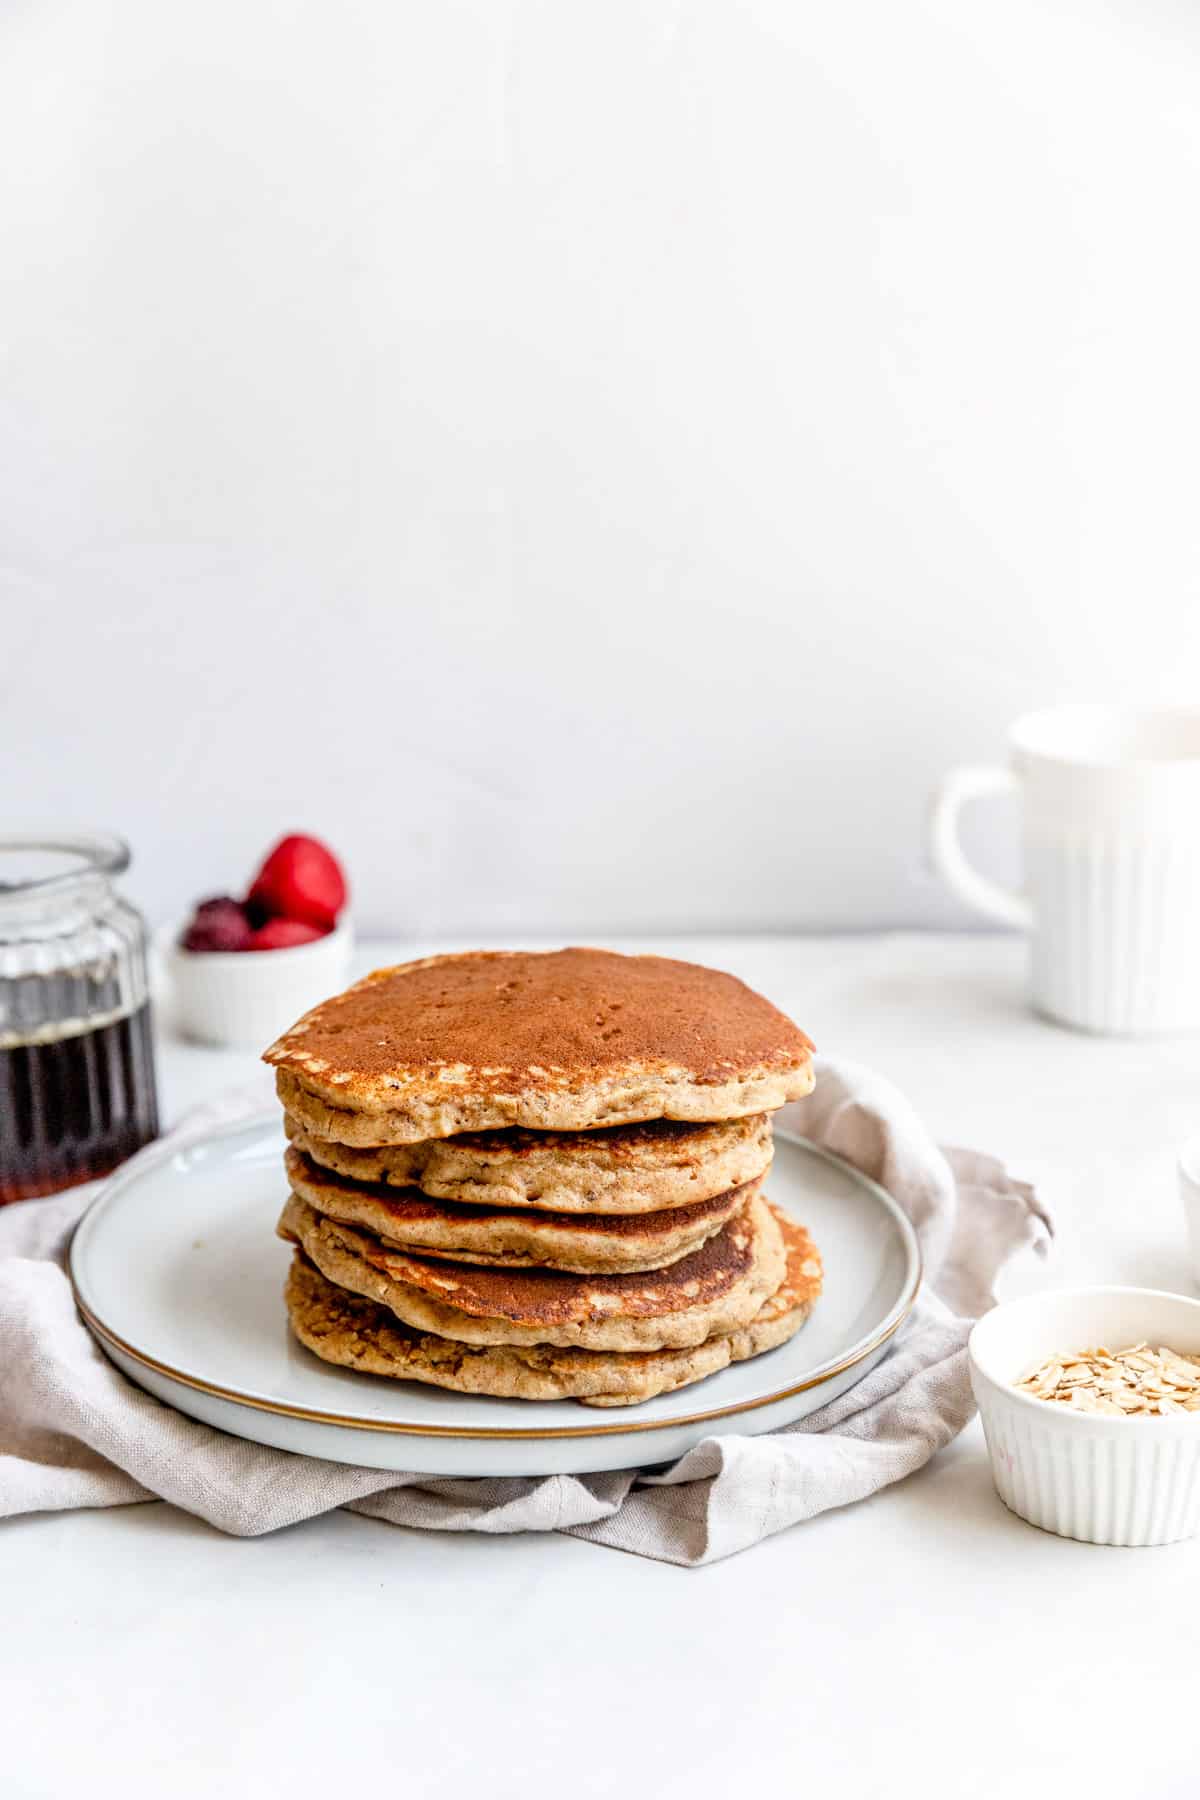 Harvest Grain and Nut Pancakes Every Little Crumb IHOP copycat Every